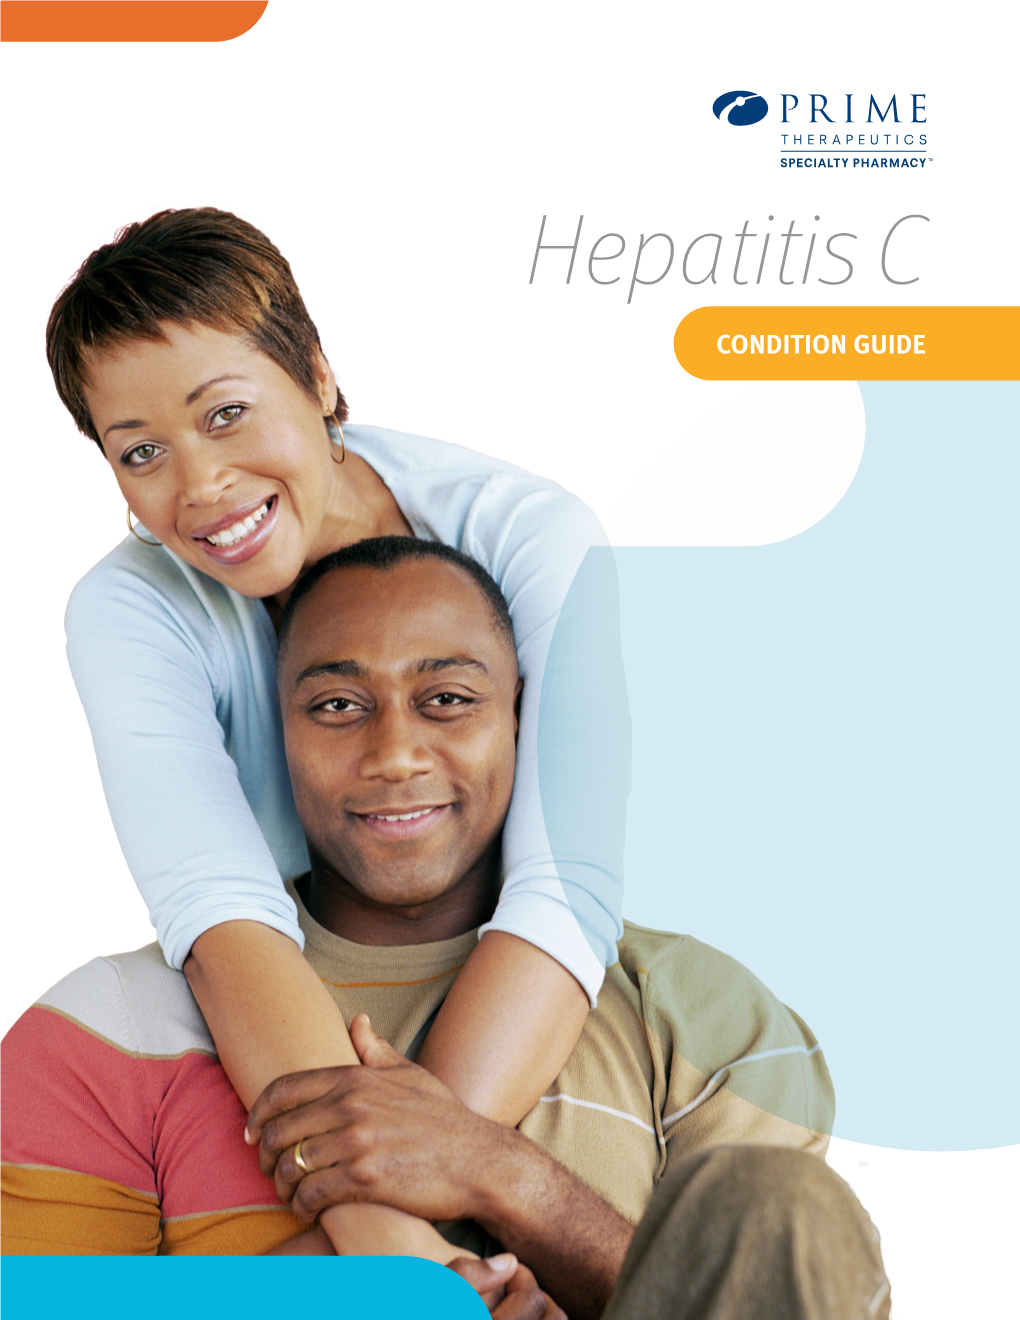 Hepatitis C CONDITION GUIDE Introduction and How to Use This Guide ��������������������������� 1